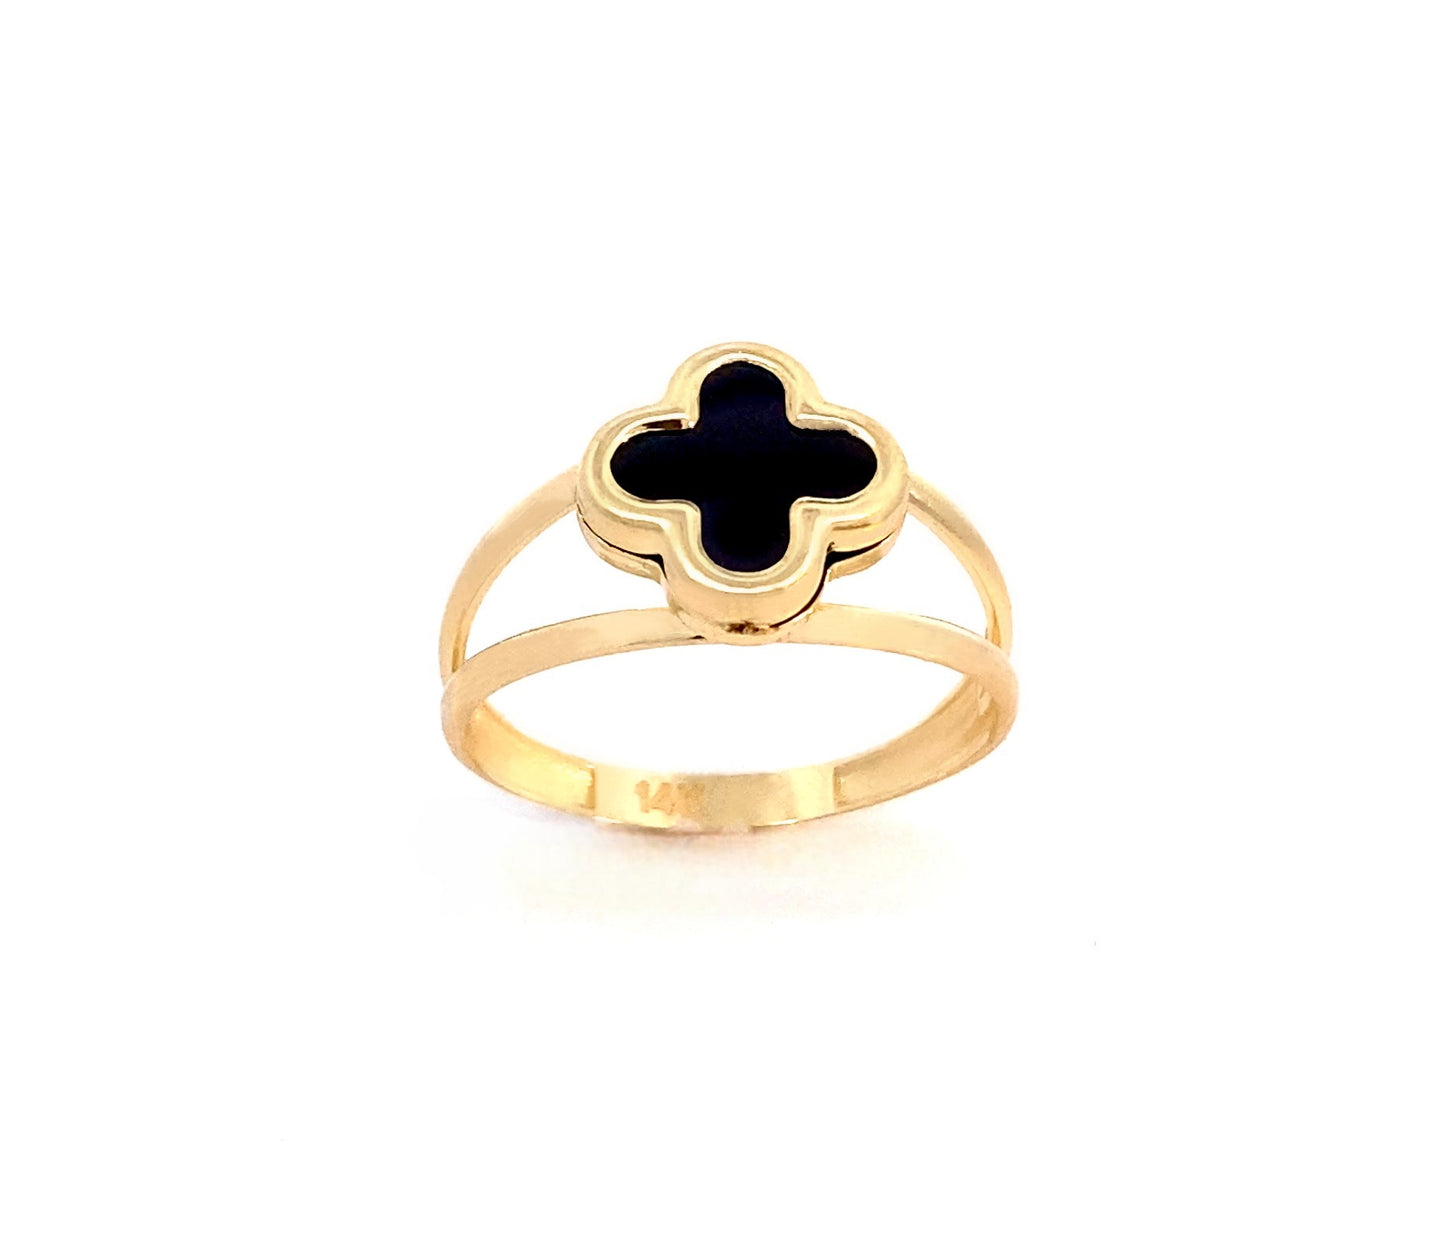 14K Solid Yellow Gold Clover Ring, trendy gold ring, solid yellow gold ring, white clover ring, black clover ring, trendy gold ring, gift, mother’s day gift., valentine’s day gift, birthday gift, anniversary gift.